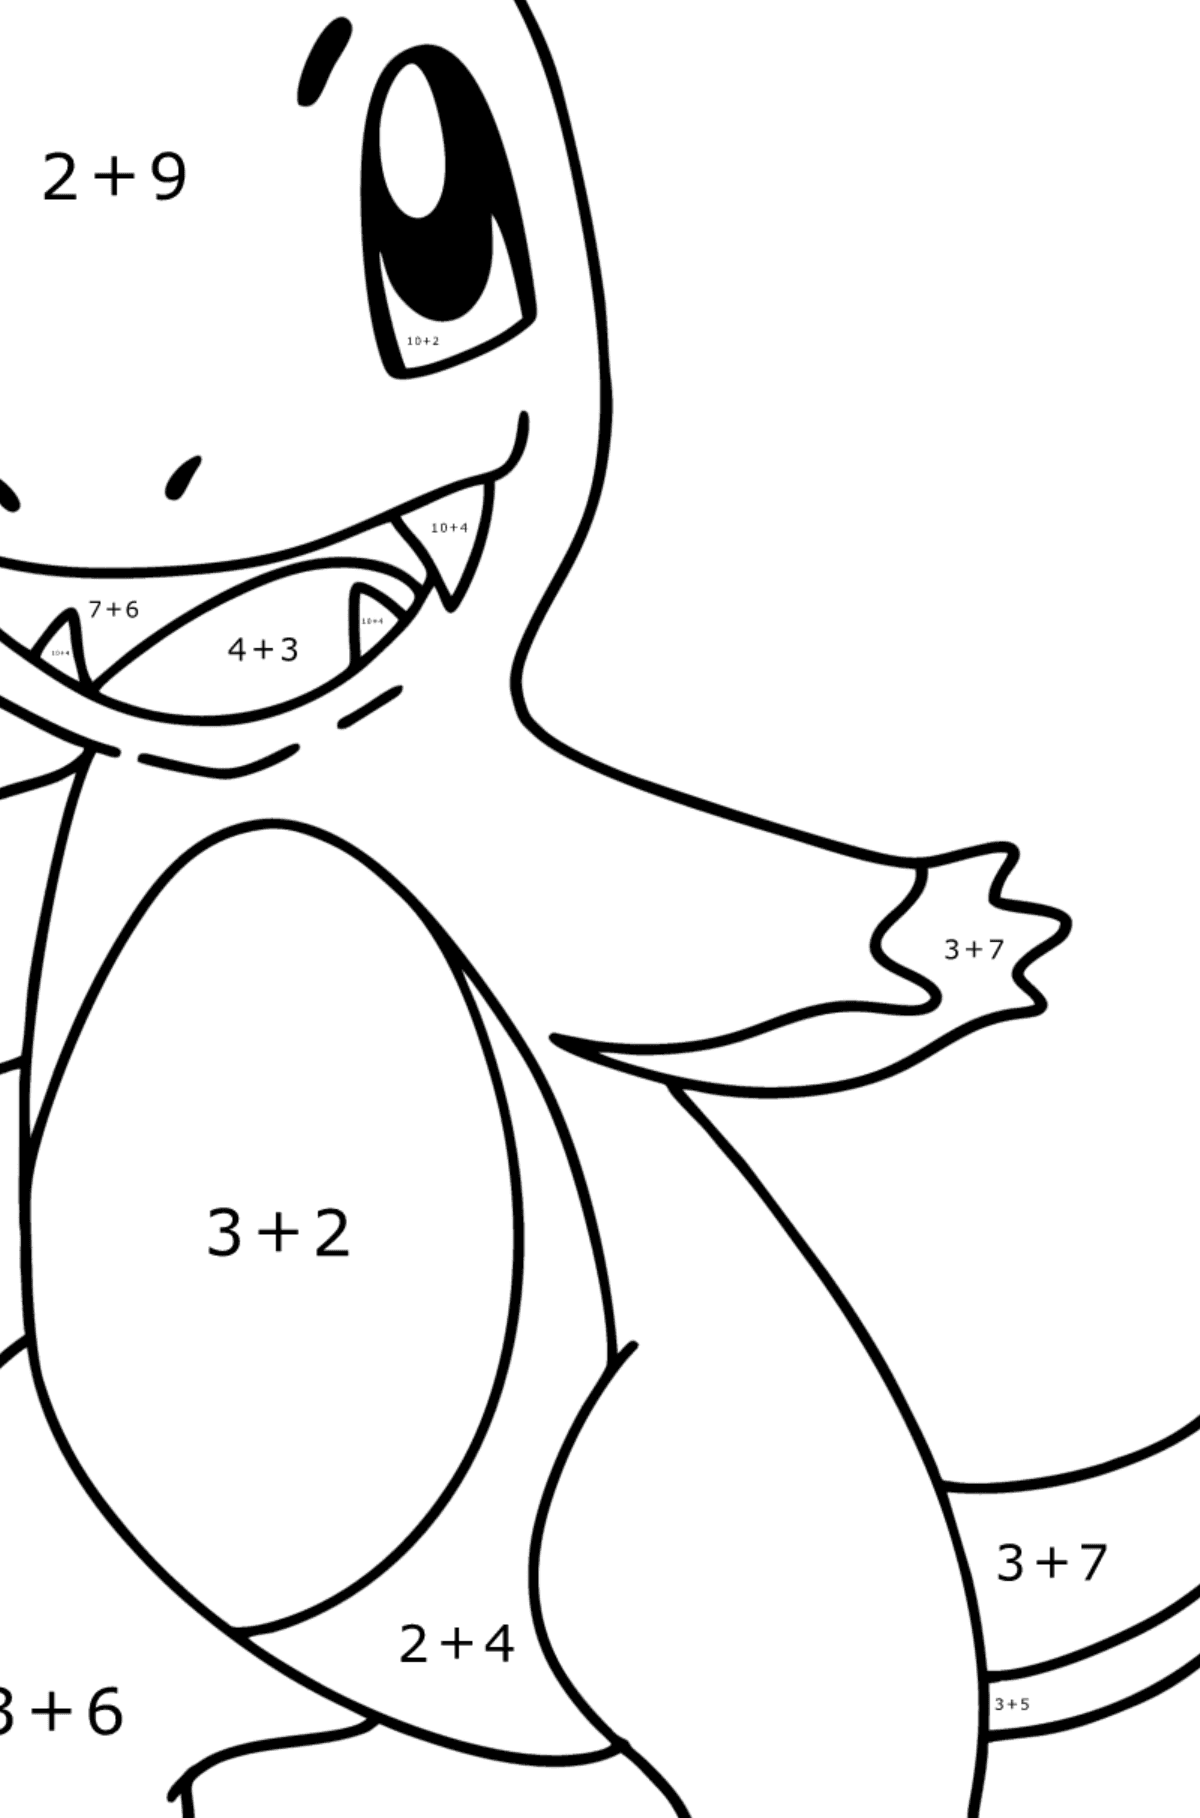 Pokémon Go Charmander coloring page - Math Coloring - Addition for Kids